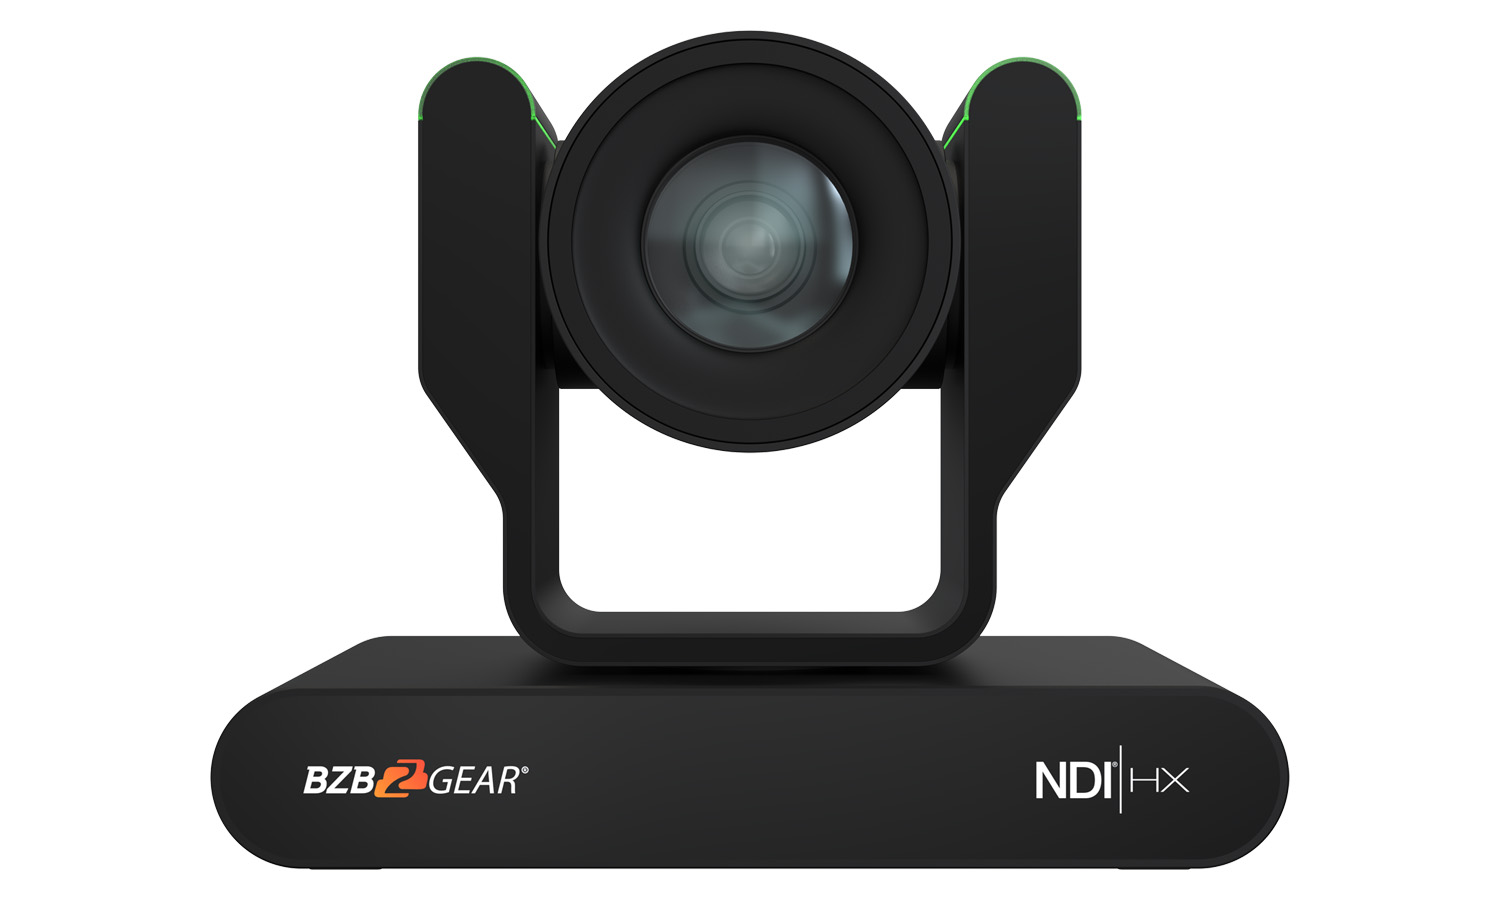 BG-ADAMO-4KND25X-B 25X 4K@60Hz HDMI2.0/12G-SDI/USB 2.0/USB 3.0/NDI|HX Live Streaming PTZ Camera with Tally Lights (Black) by BZBGEAR